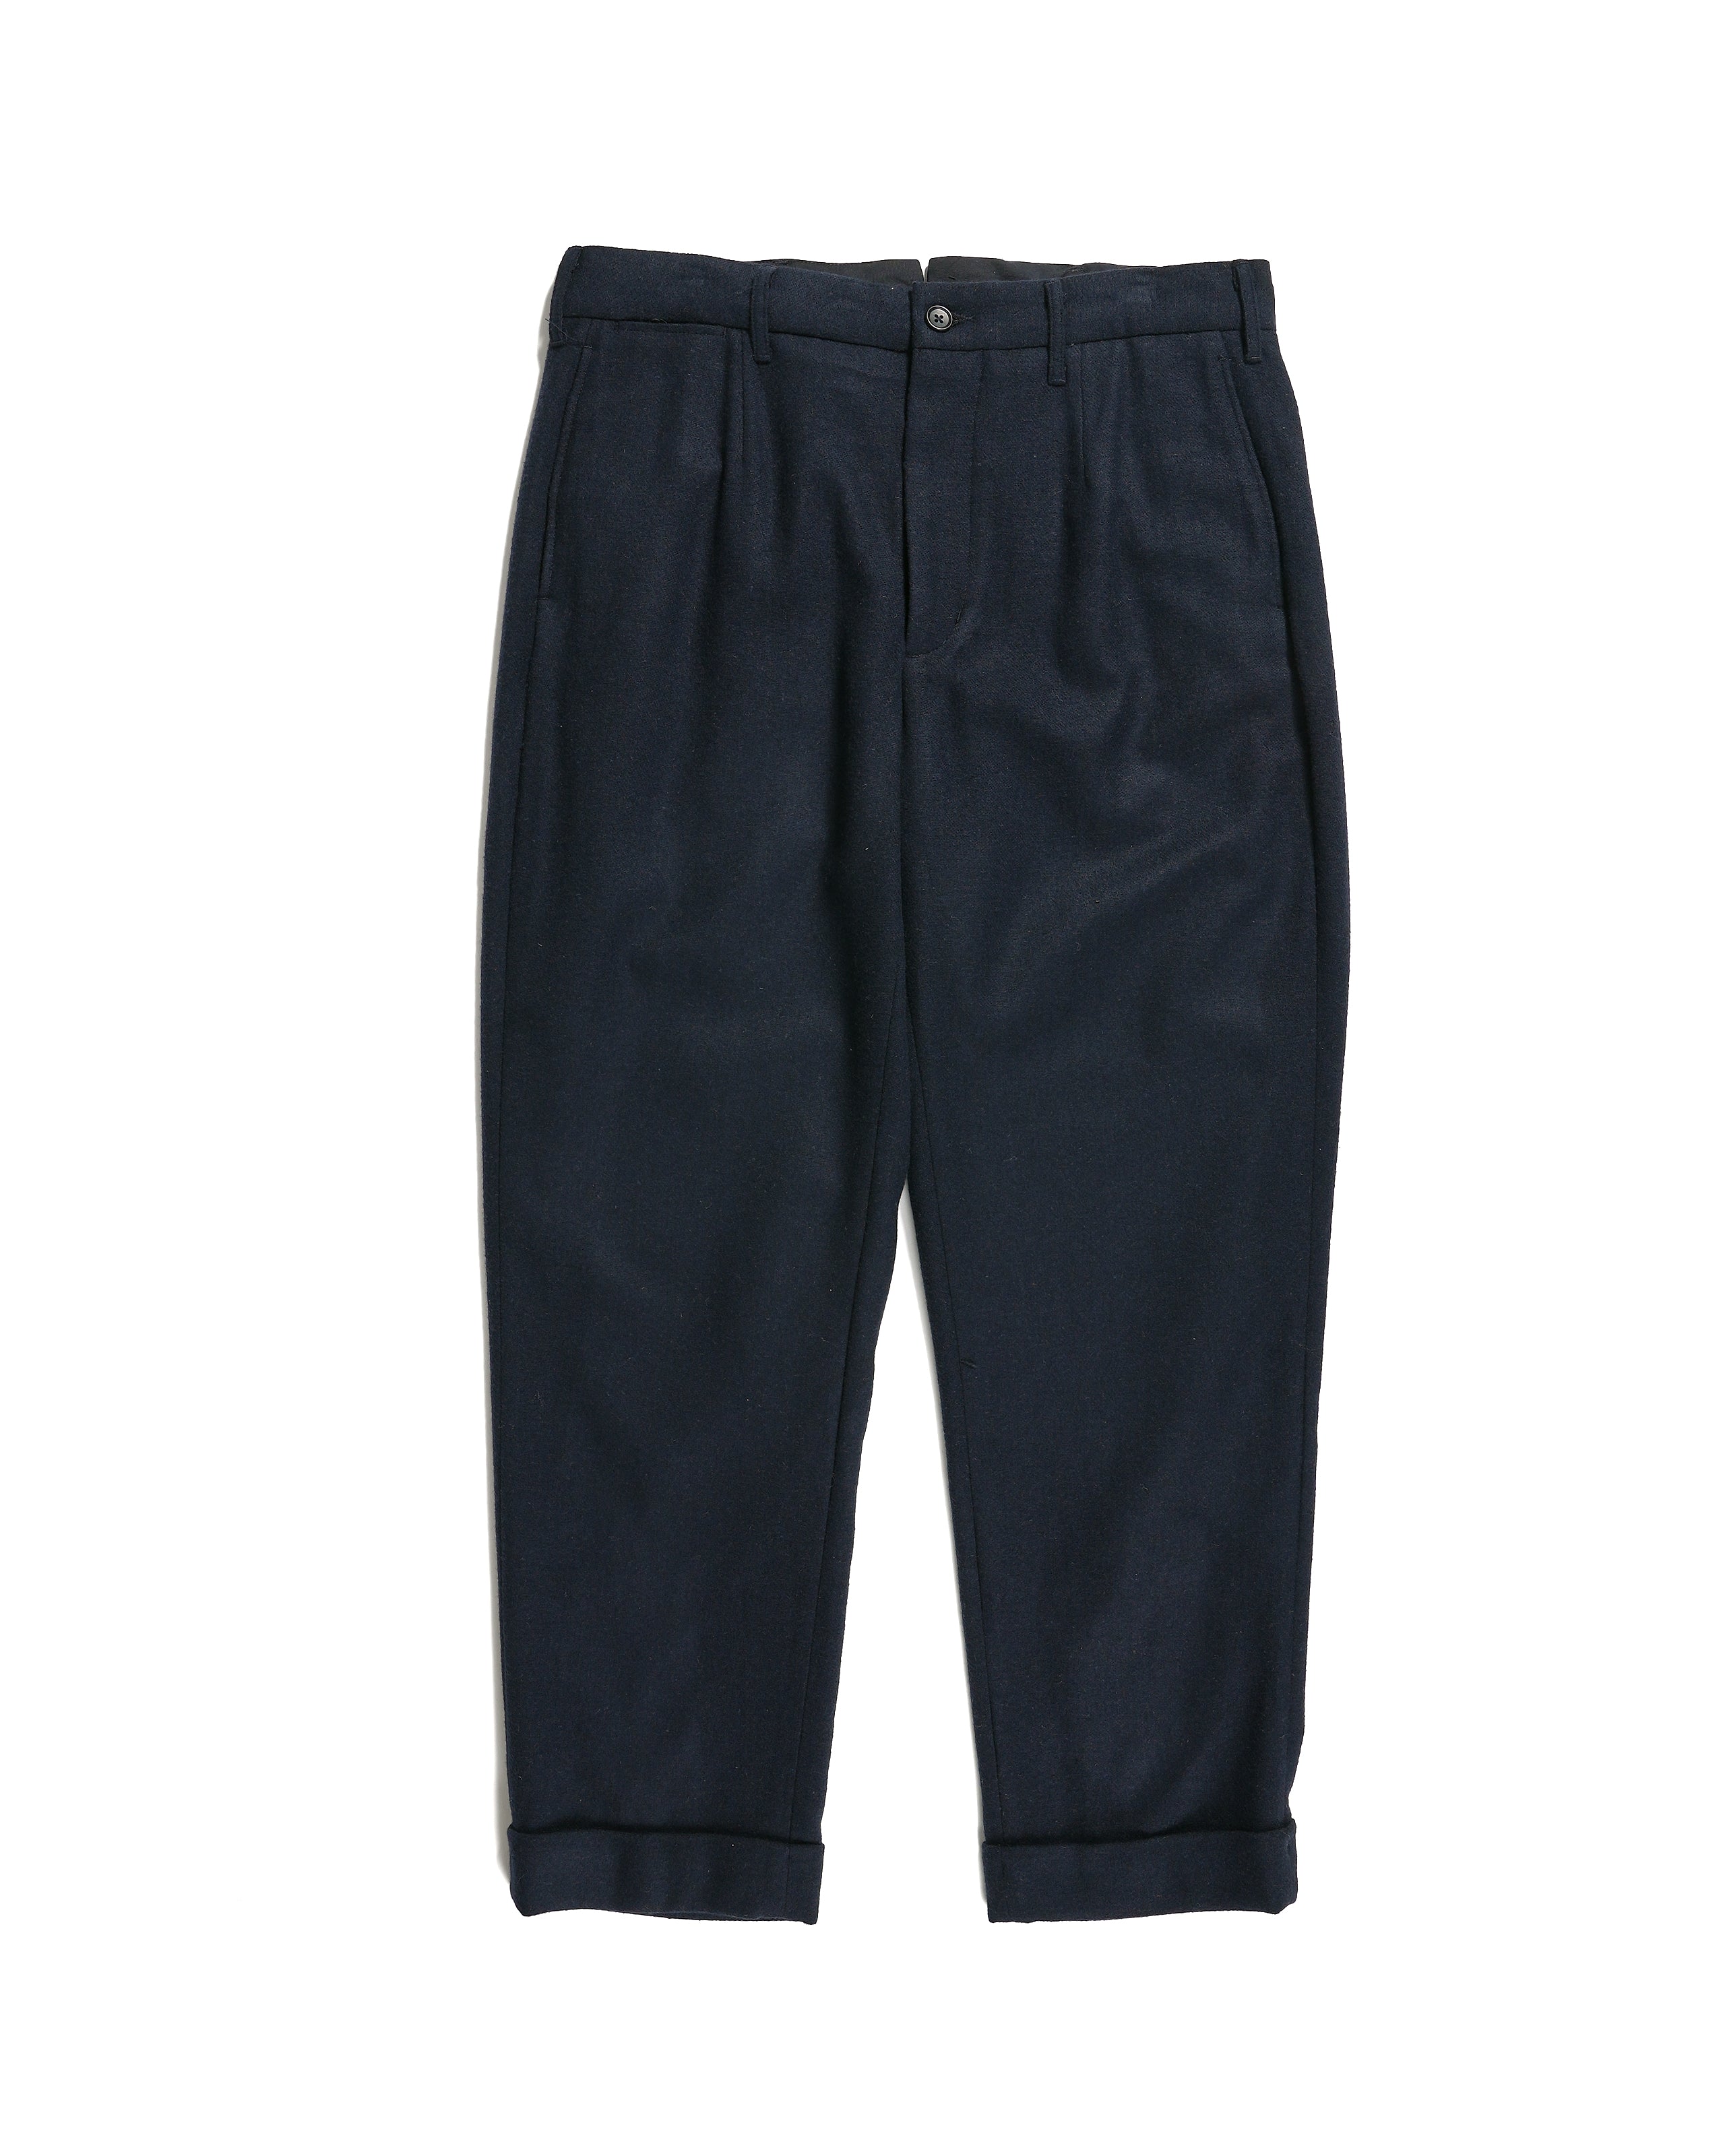 Andover Pant - Navy Solid Poly Wool Flannel